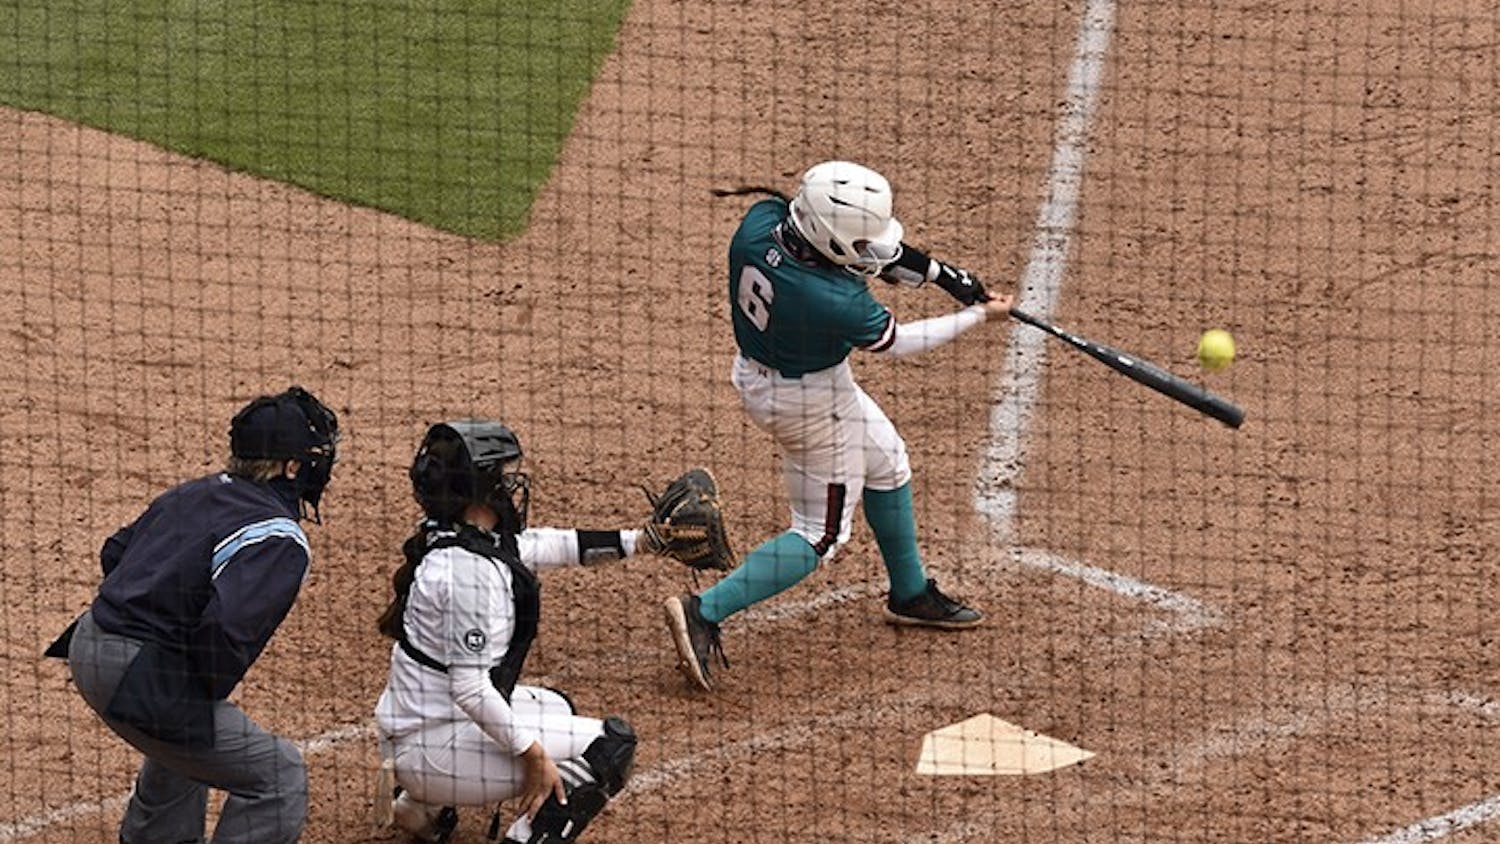 Junior catcher Jordan Fabian connects on a pitch in Sunday's game against the University of Central Florida. The Gamecocks wore teal for “All for Alex,” which is an organization that aids in the fight against ovarian cancer.&nbsp;